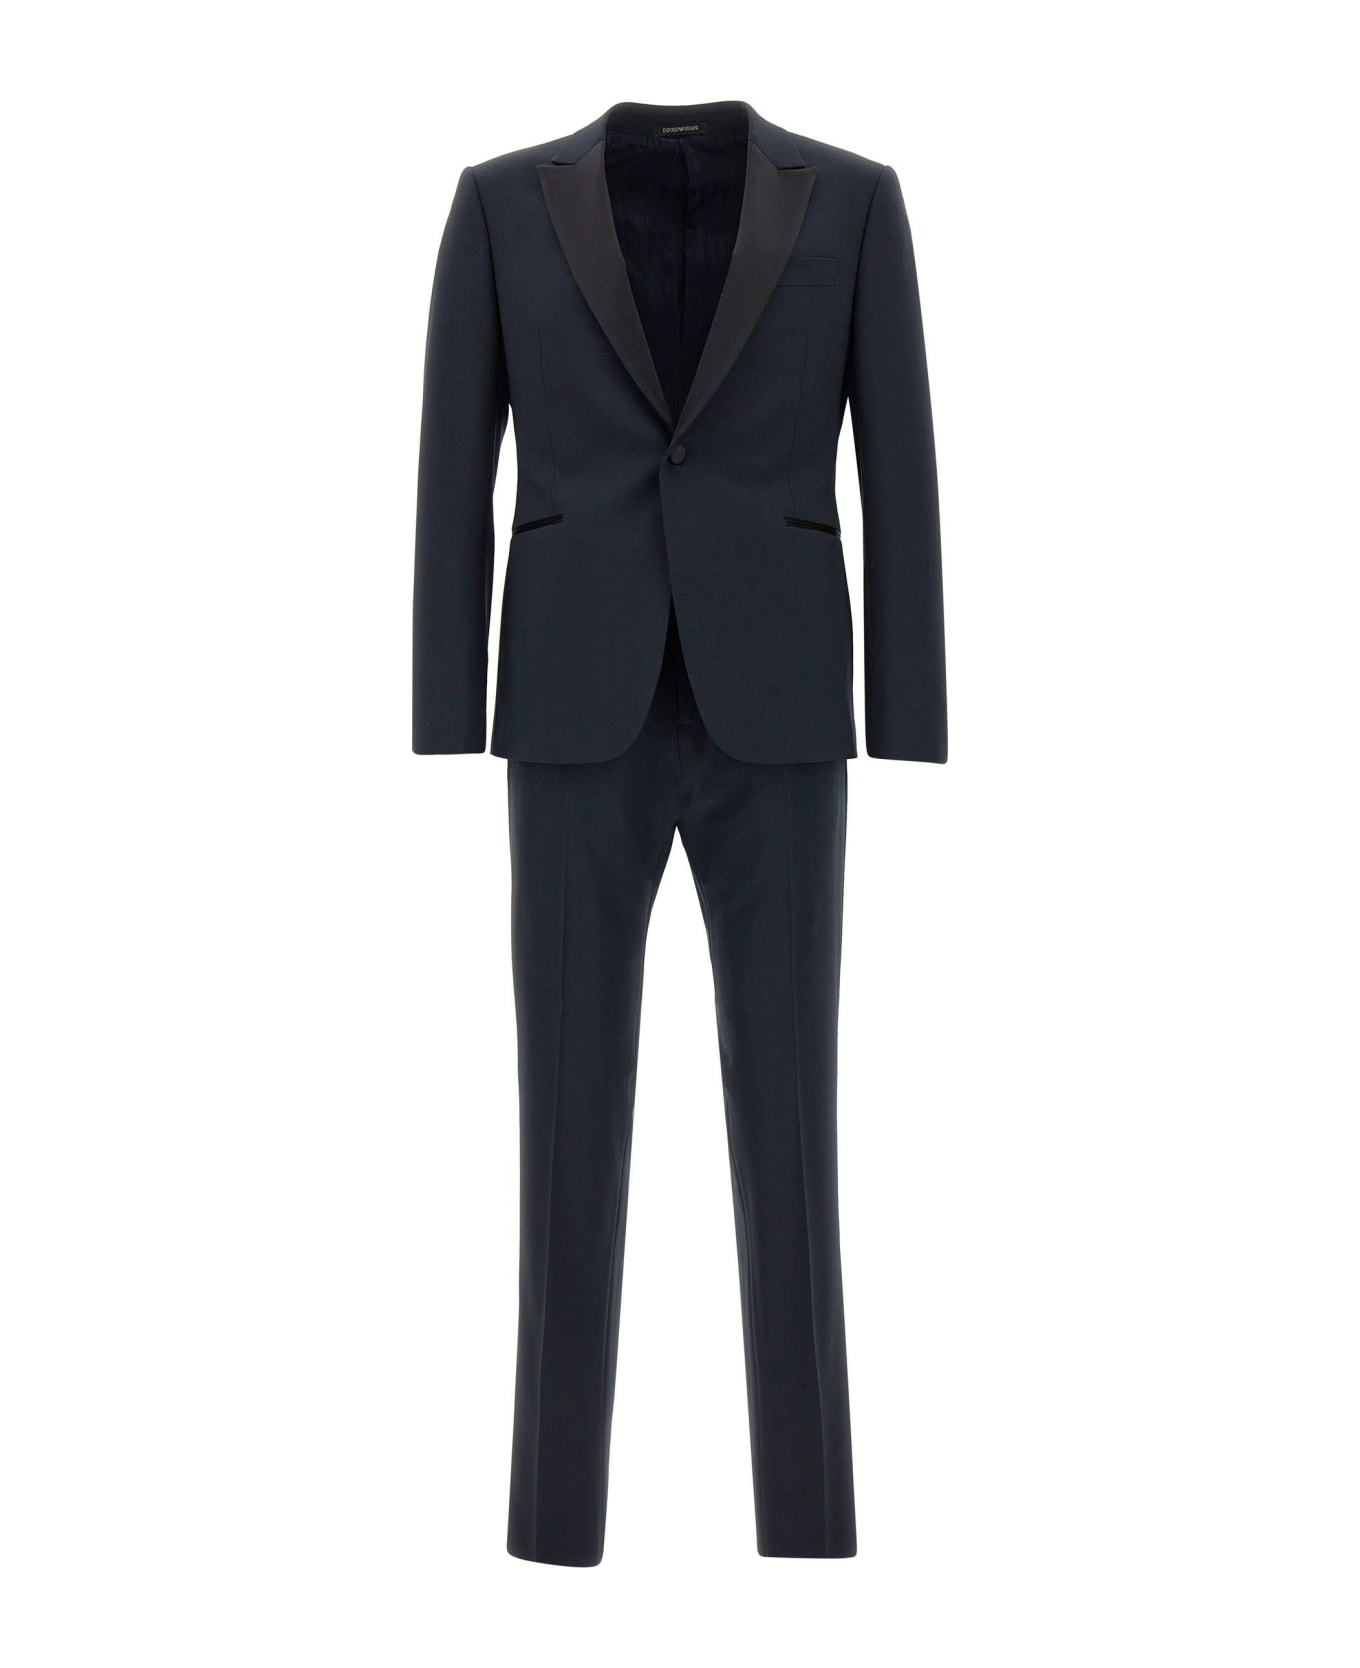 Emporio Armani Fresh Wool Two-piece Formal Suit - Navy スーツ